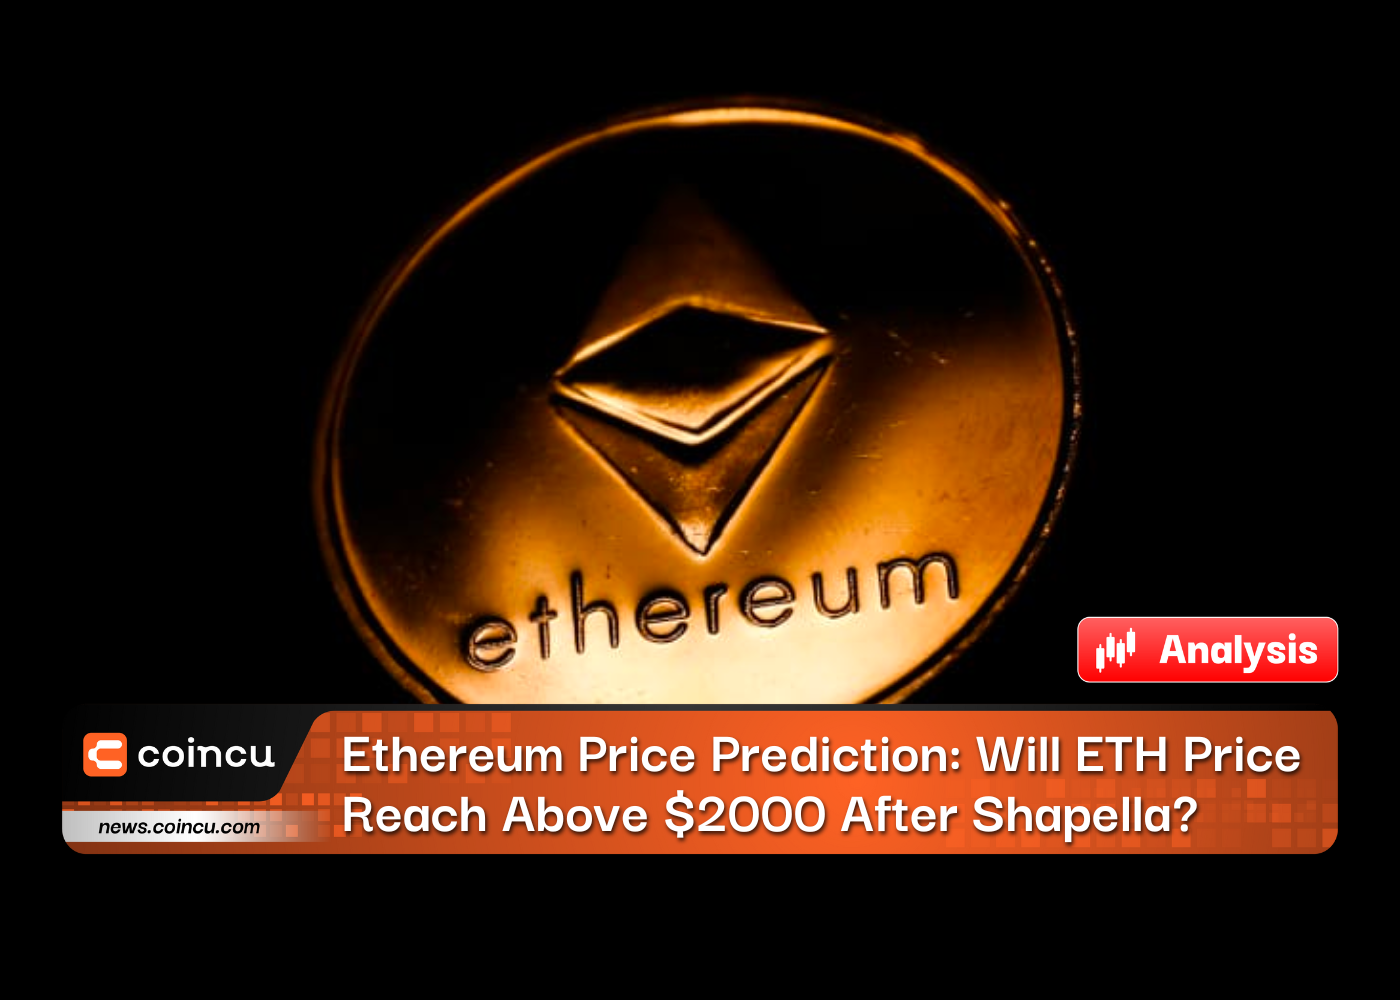 Ethereum Price Prediction: Will ETH Price Reach Above $2000 After Shapella?